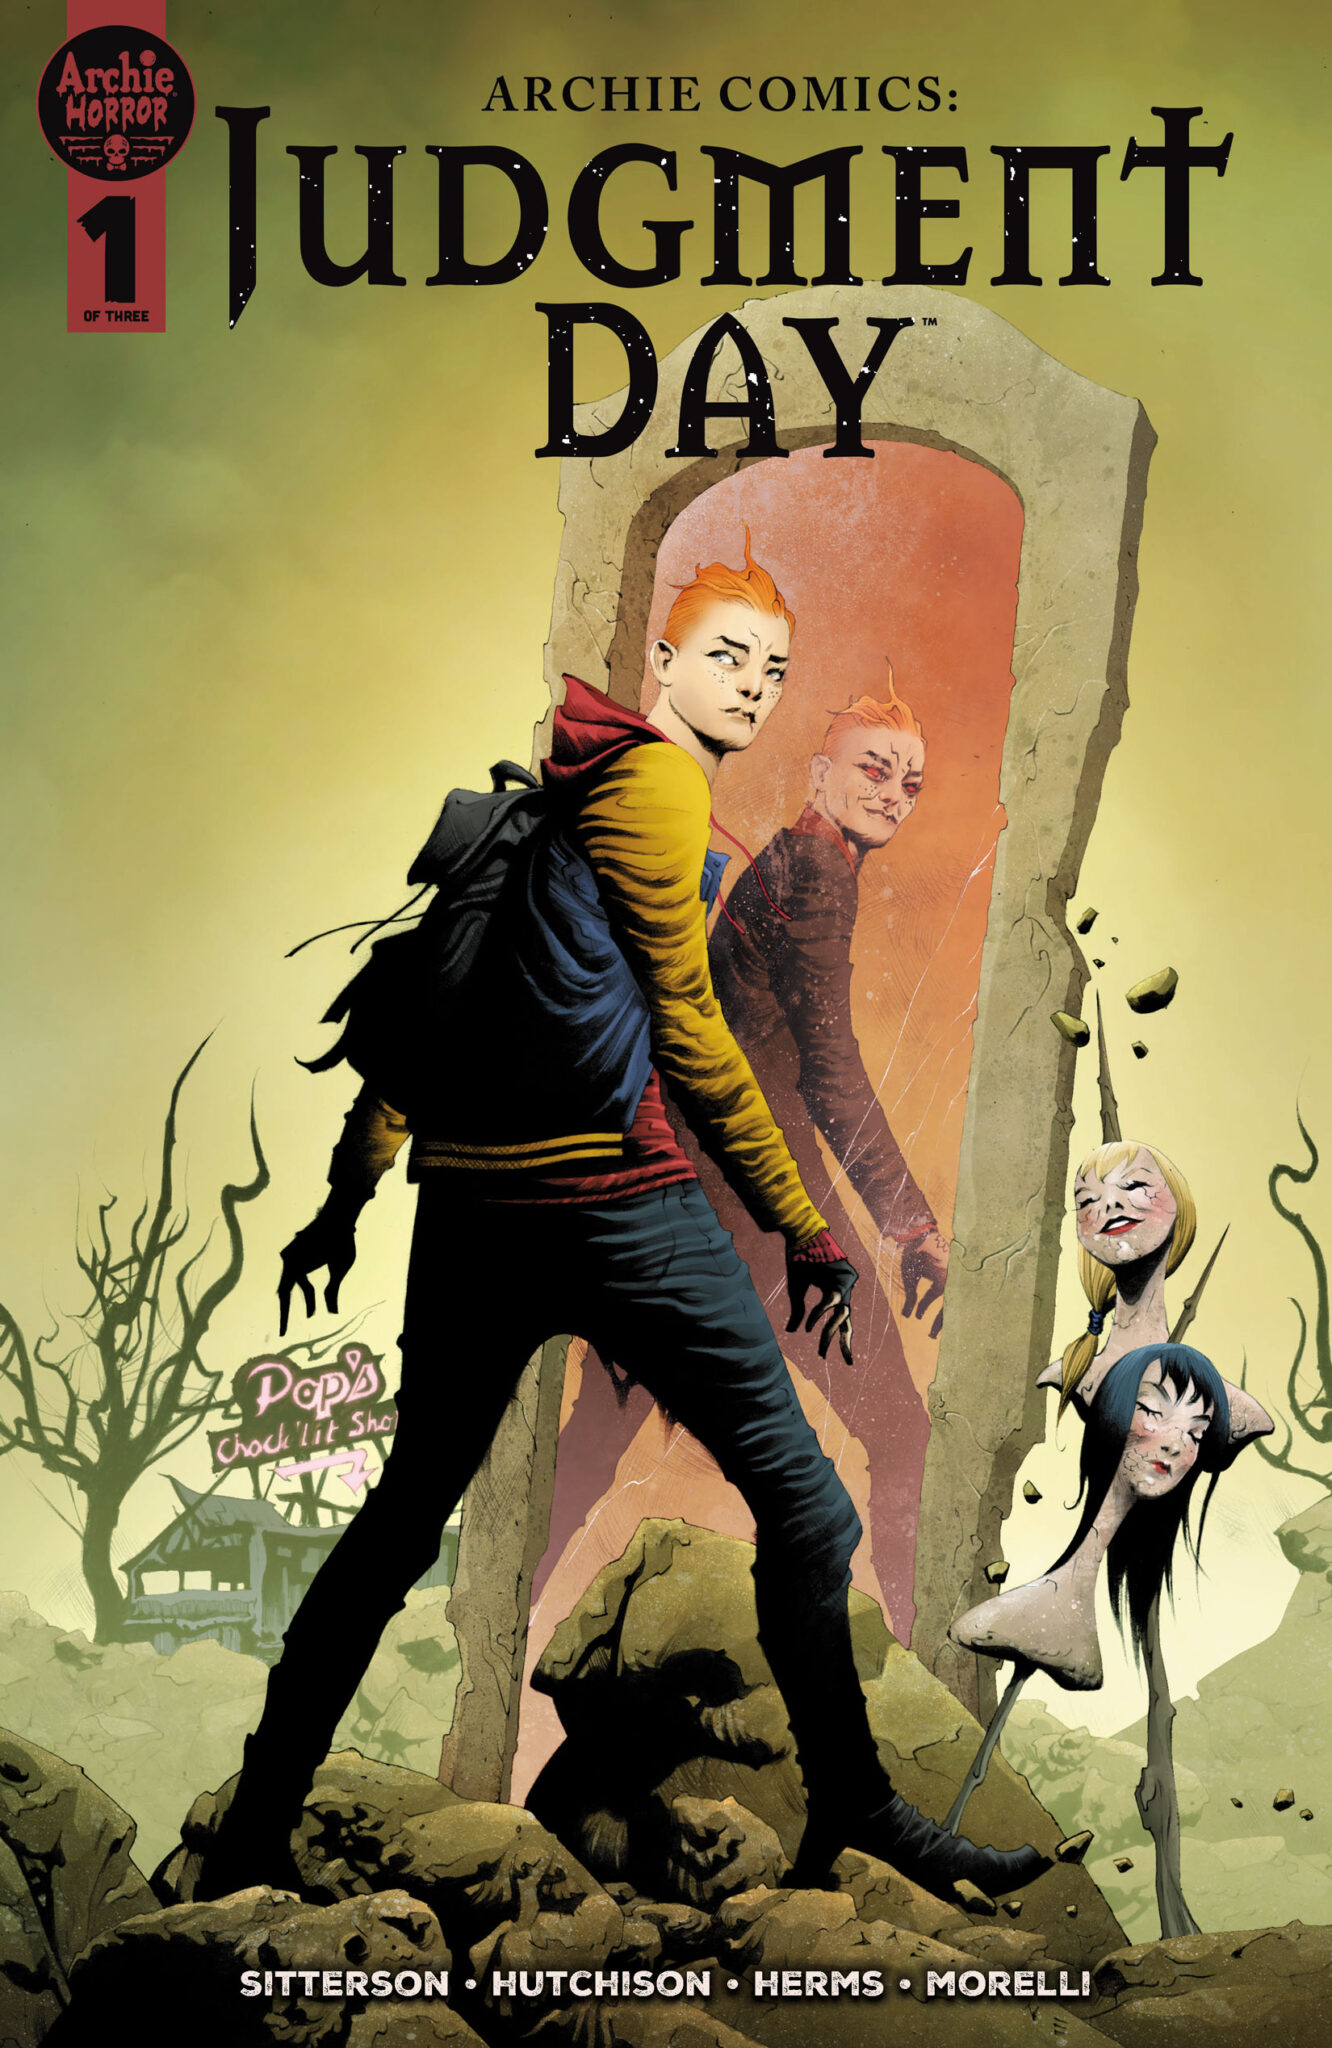 ARCHIE COMICS: JUDGMENT DAY #1 variant cover 